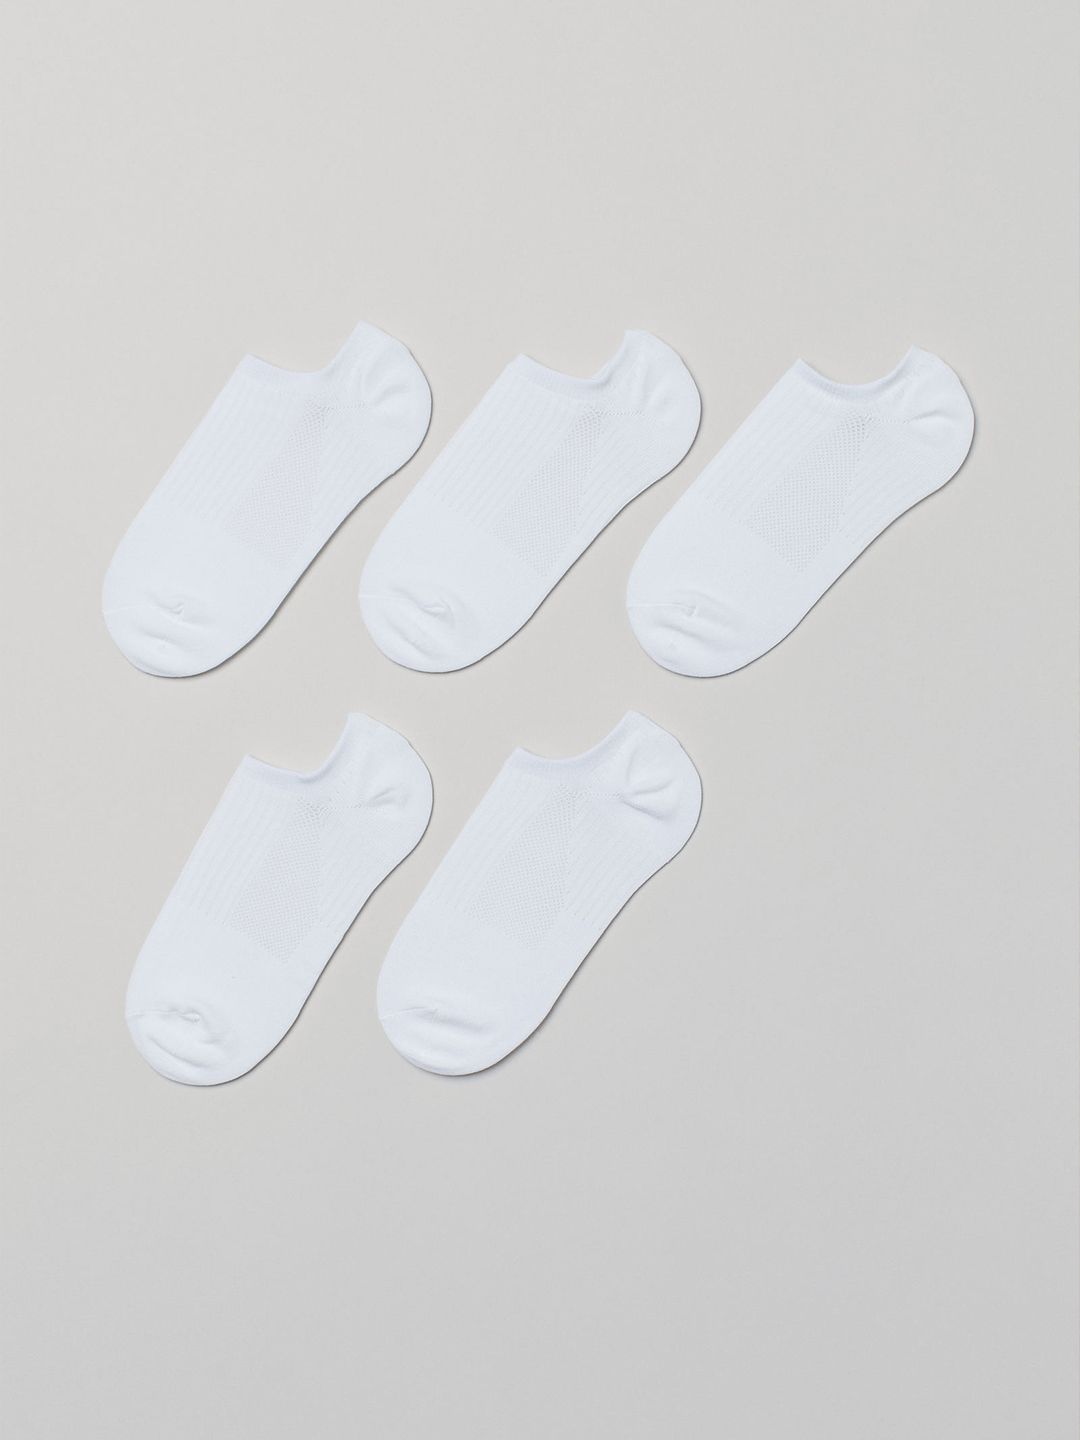 H&M Women White Solid Pack of 5 Sports Socks Price in India